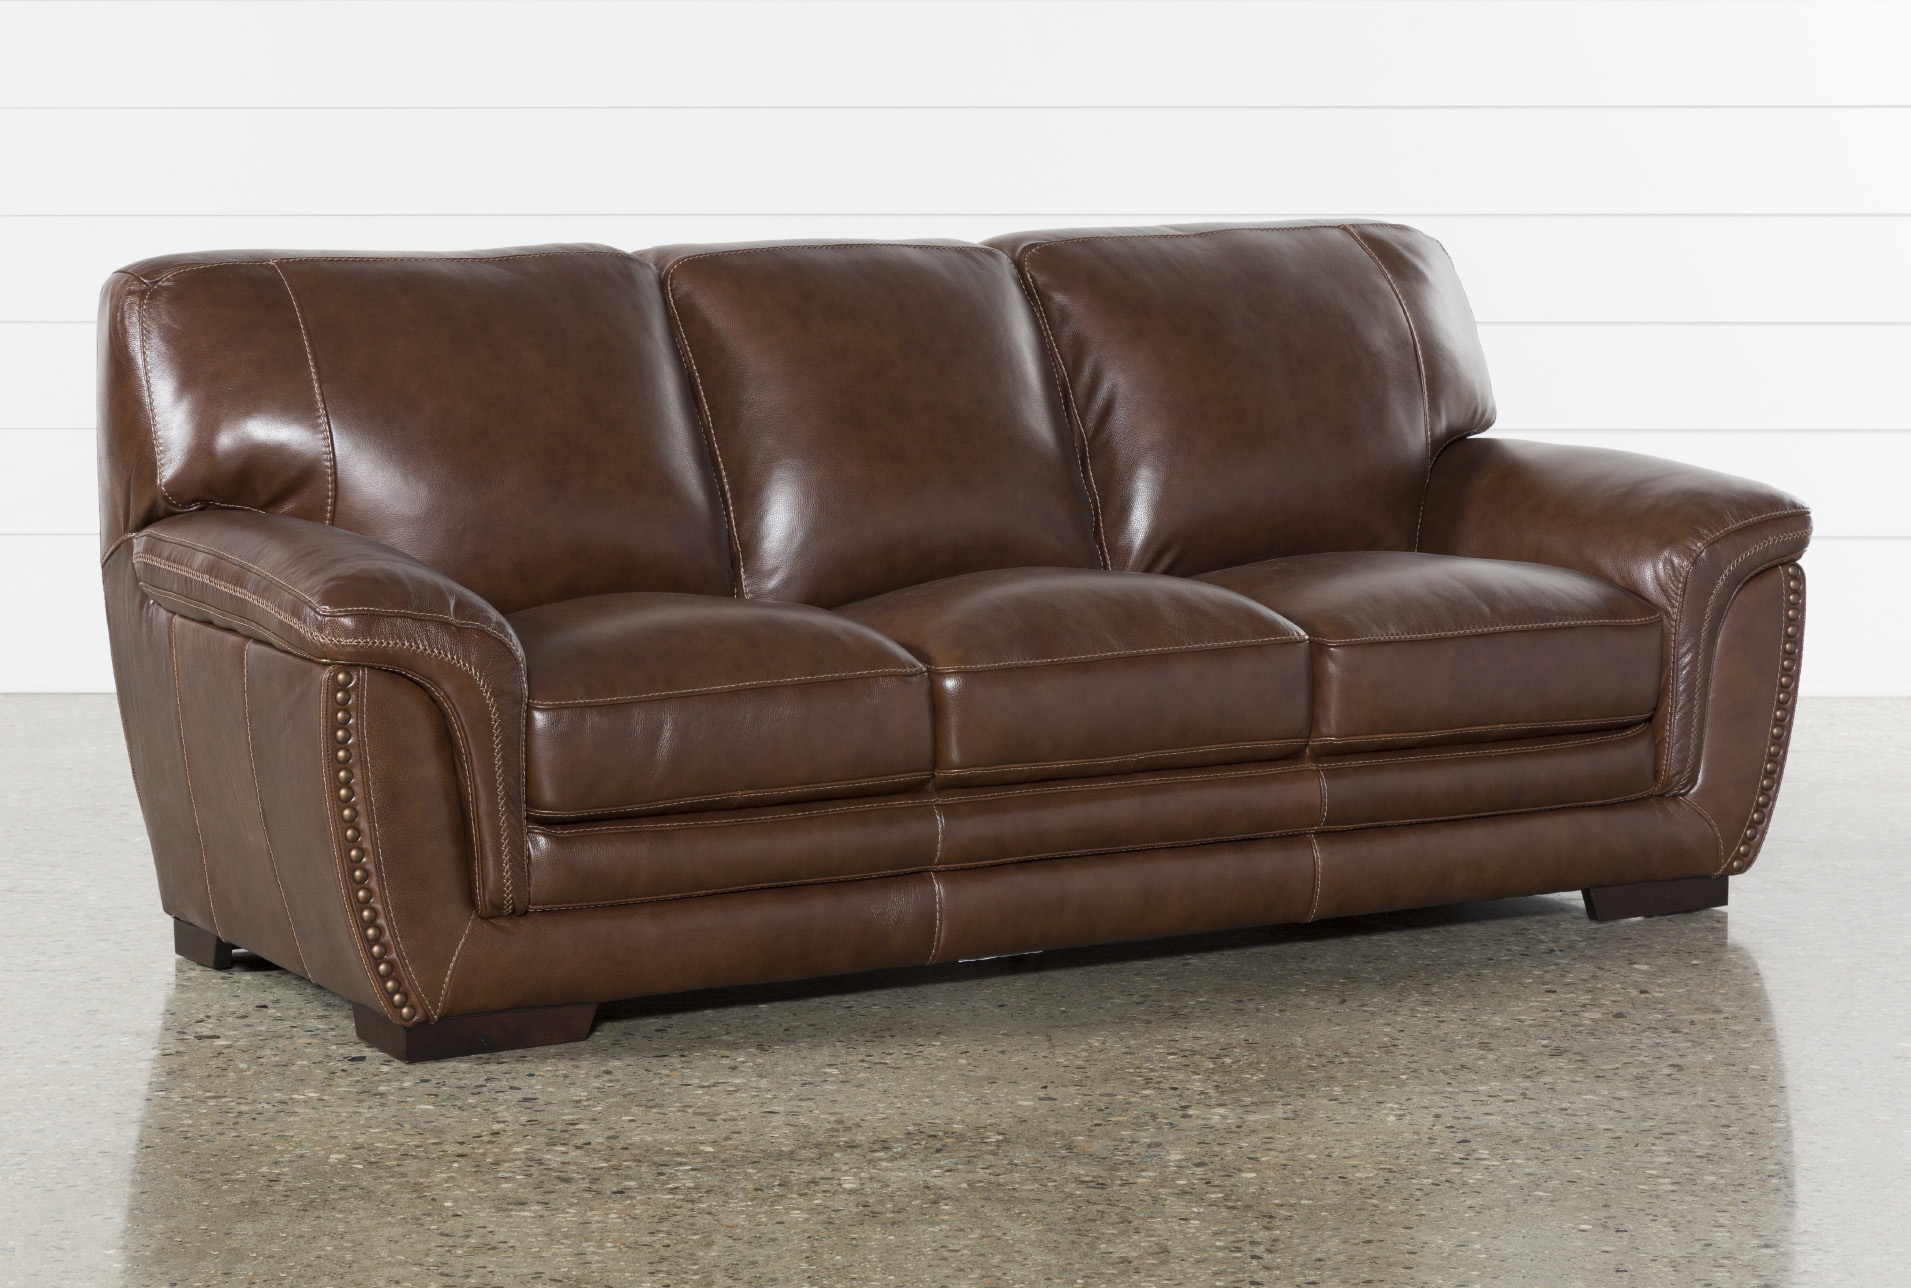 brown leather sofa dimensions